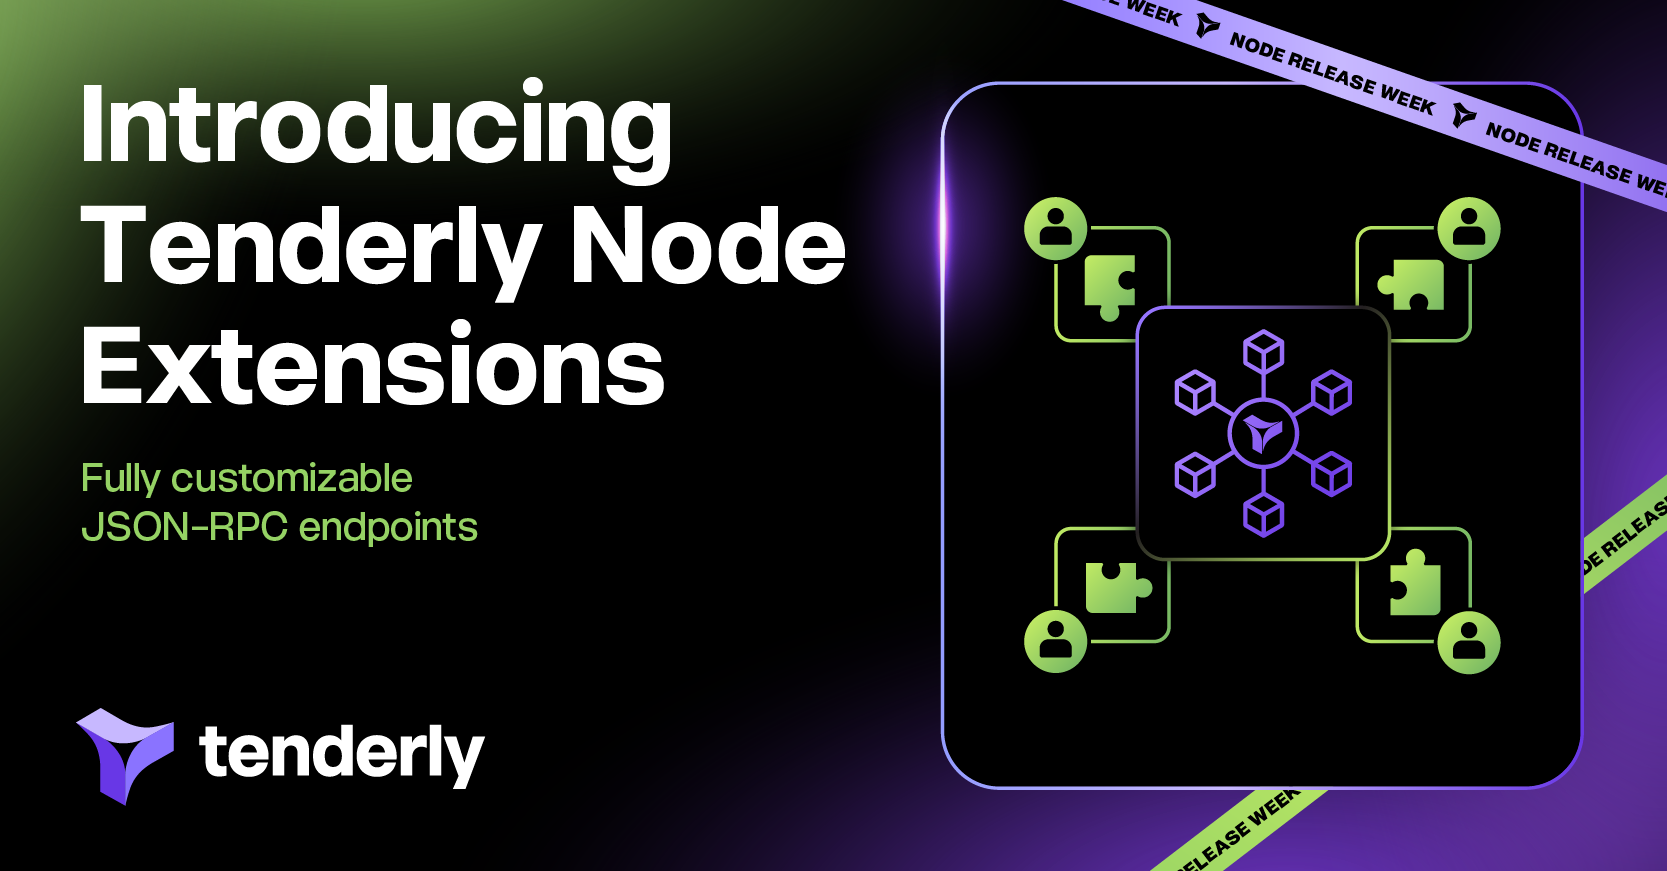 Introducing Tenderly Node Extensions